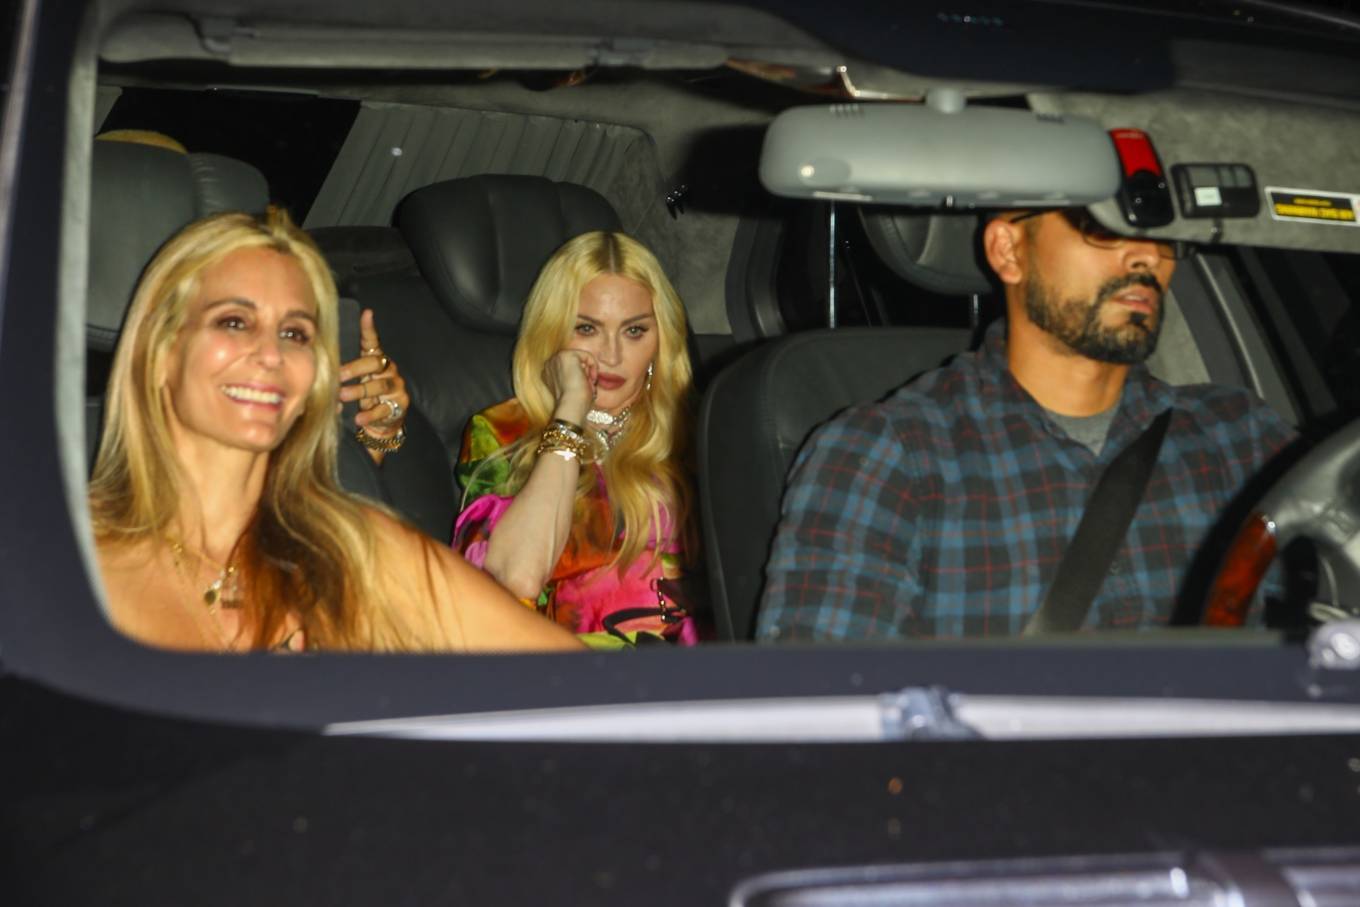 Pictures Of Britney Spears Wedding